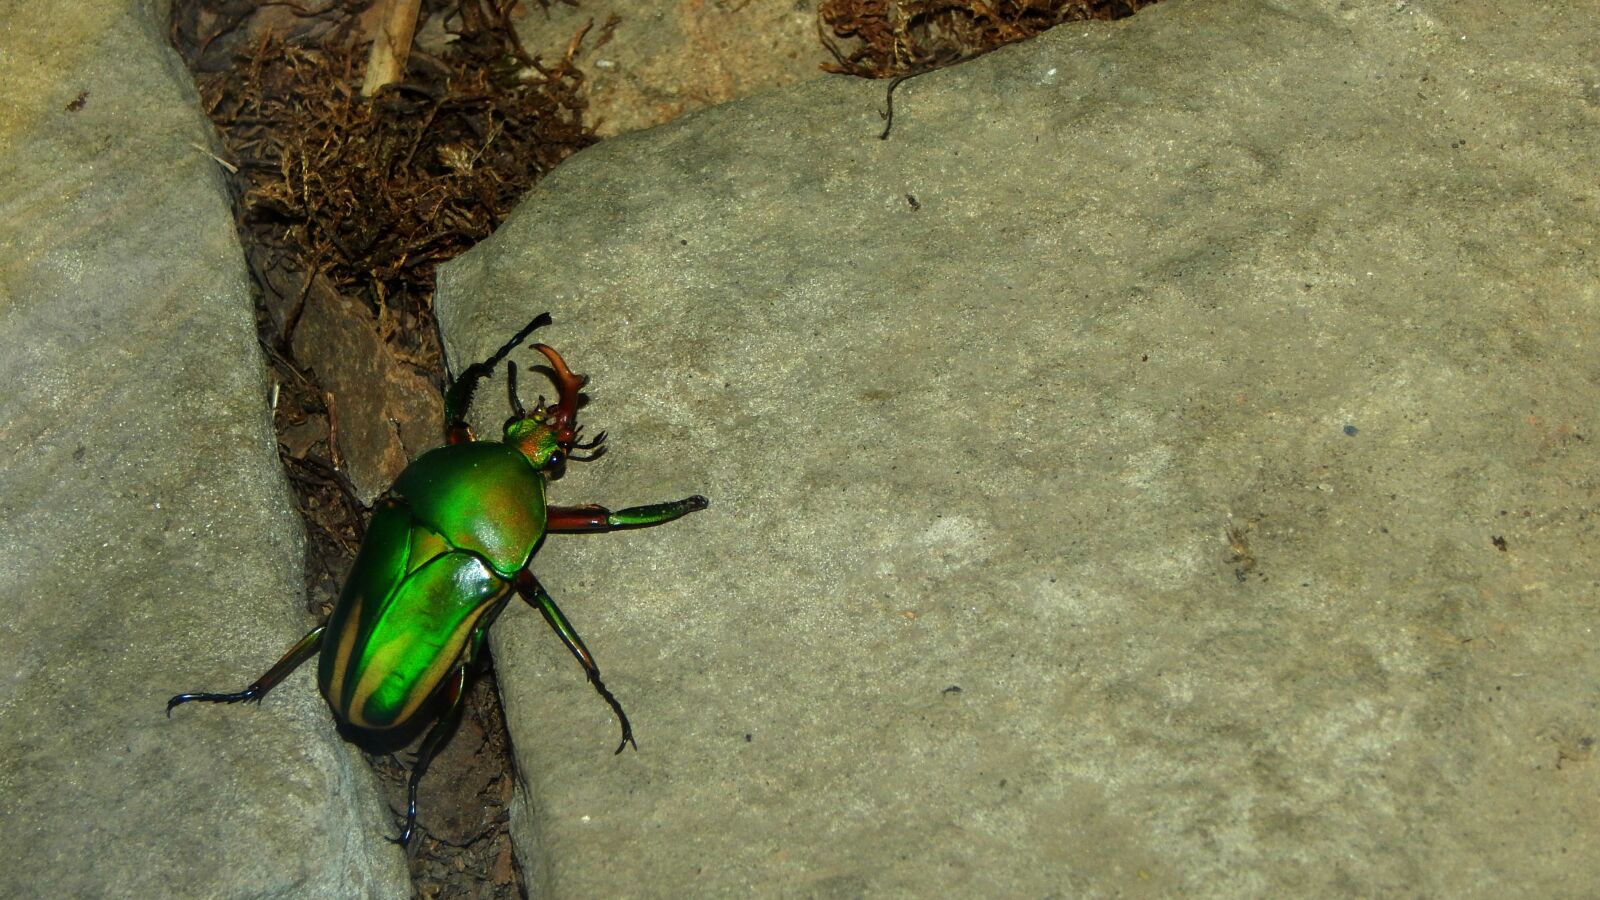 Nikon Coolpix L830 sample photo. Beetle, insect, nature photography